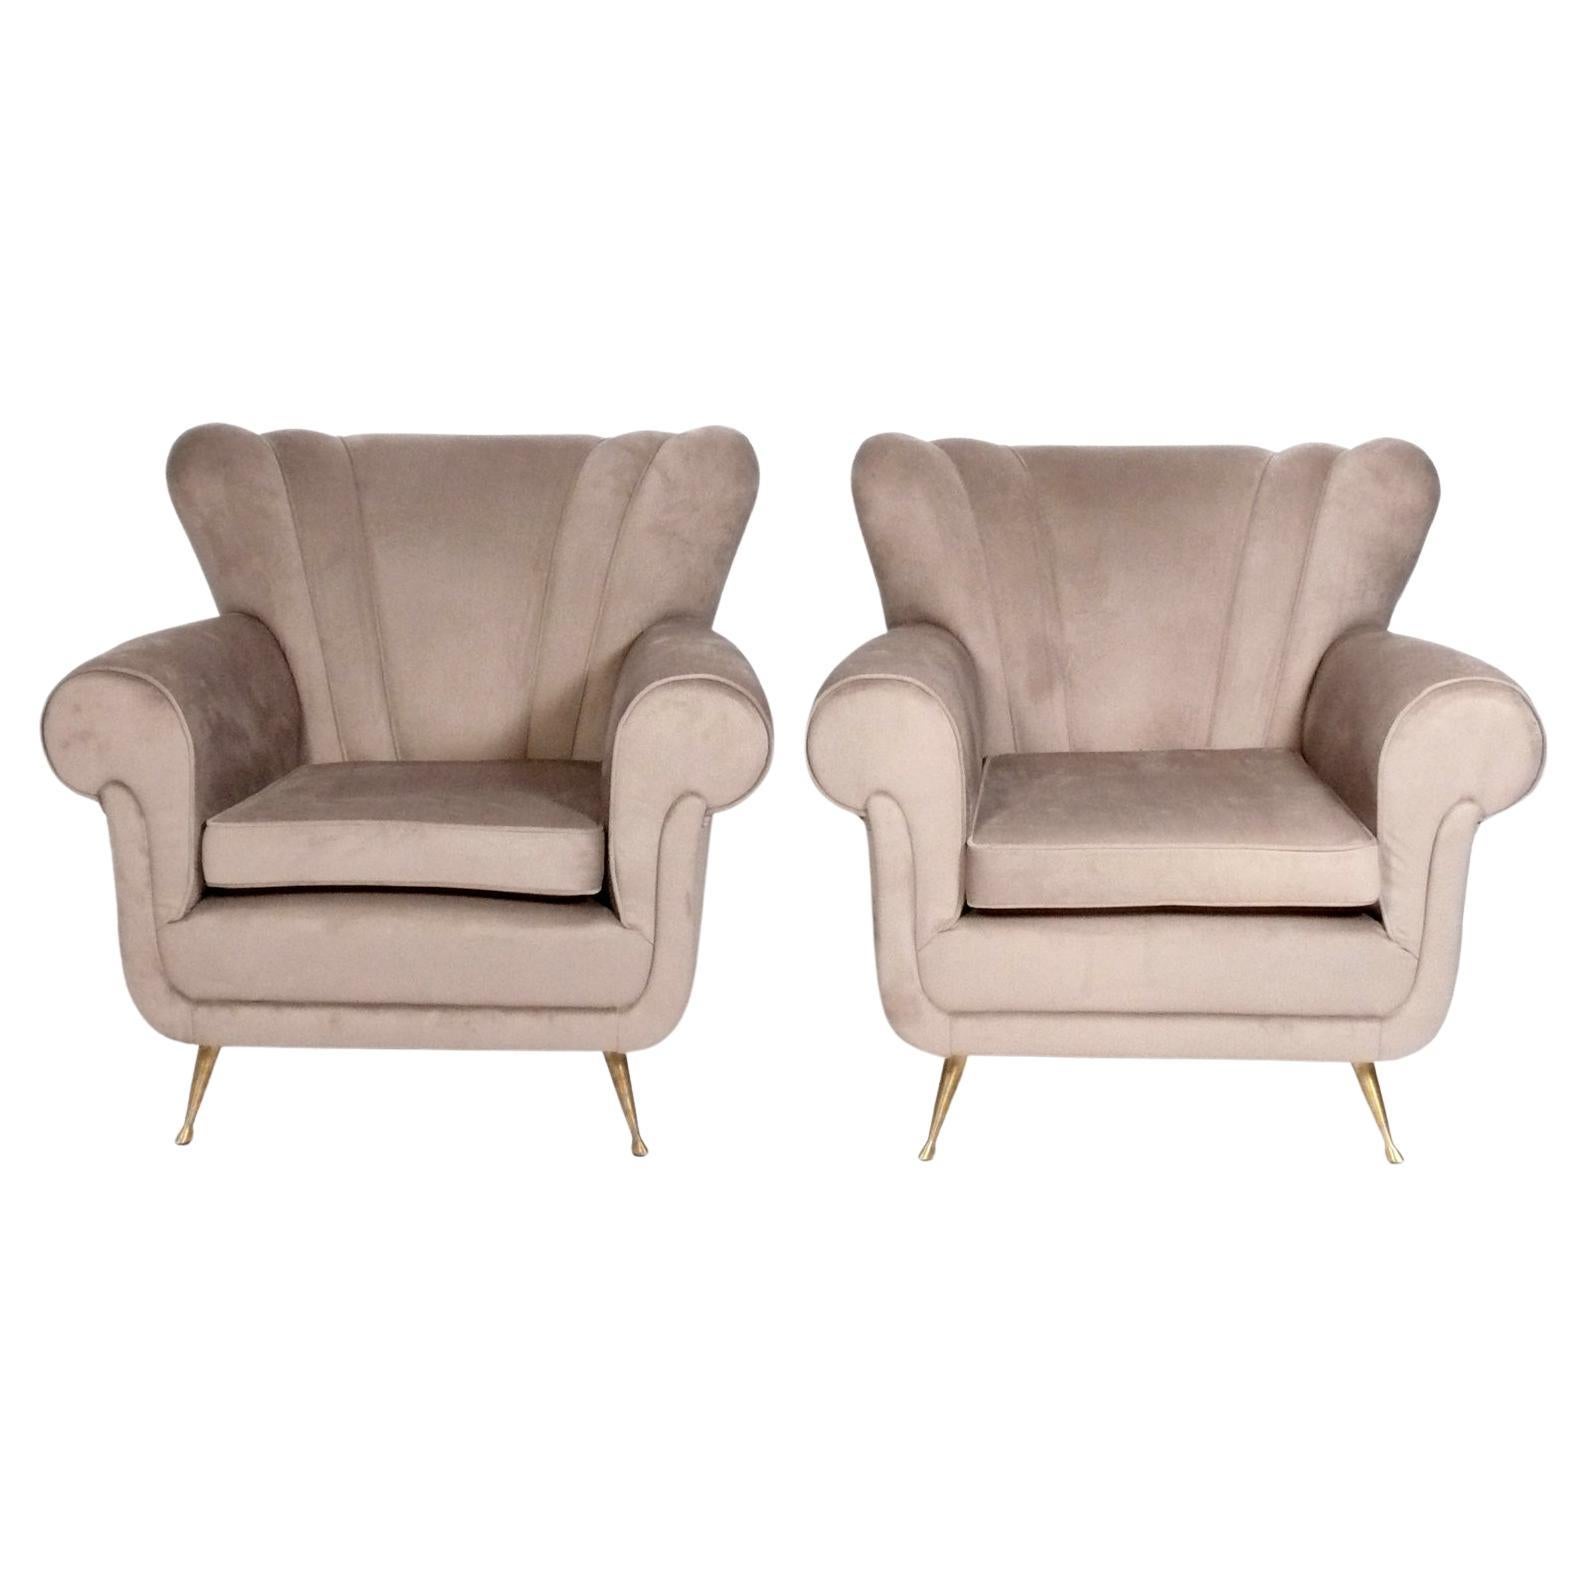 Pair of Italian Lounge Chairs Mid Century Style  For Sale